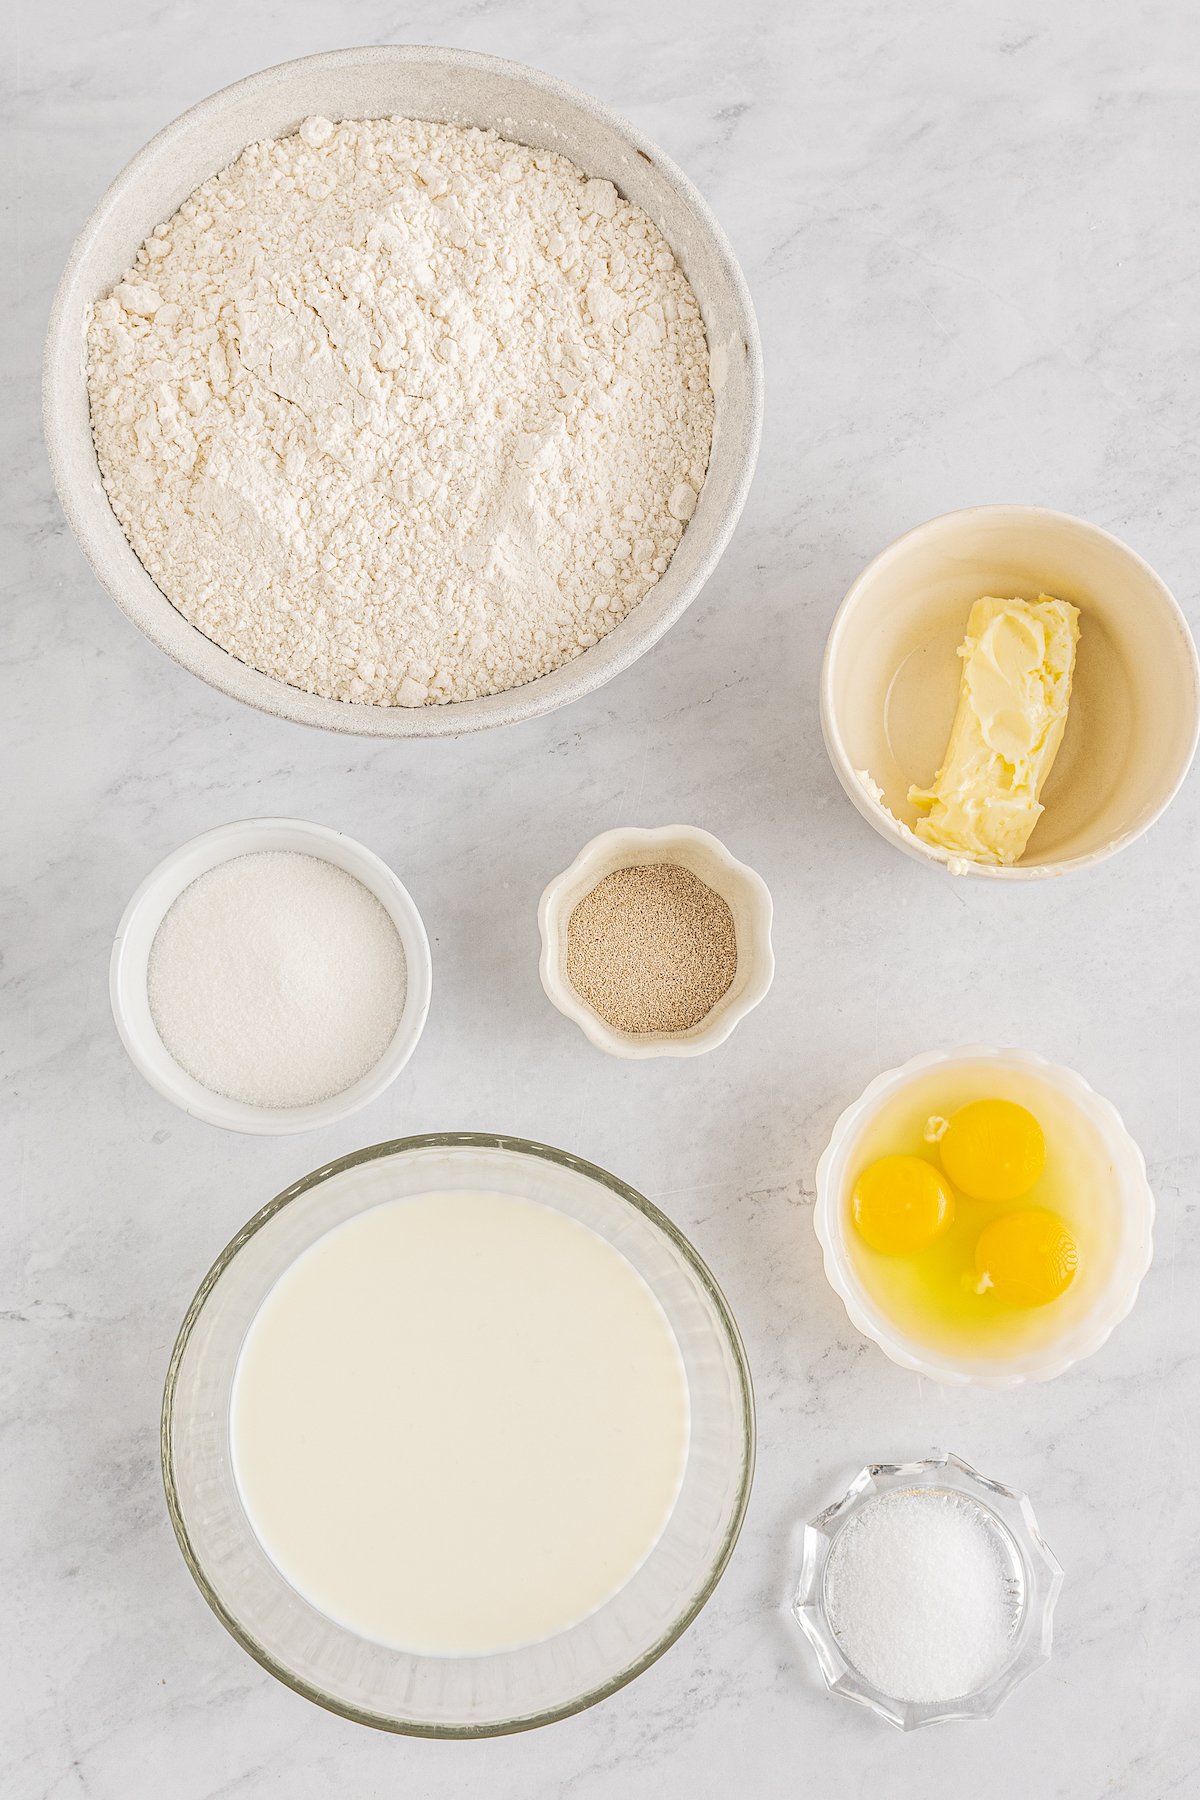 Clockwise from top: Flour, softened butter, yeast, eggs, milk, sugar.